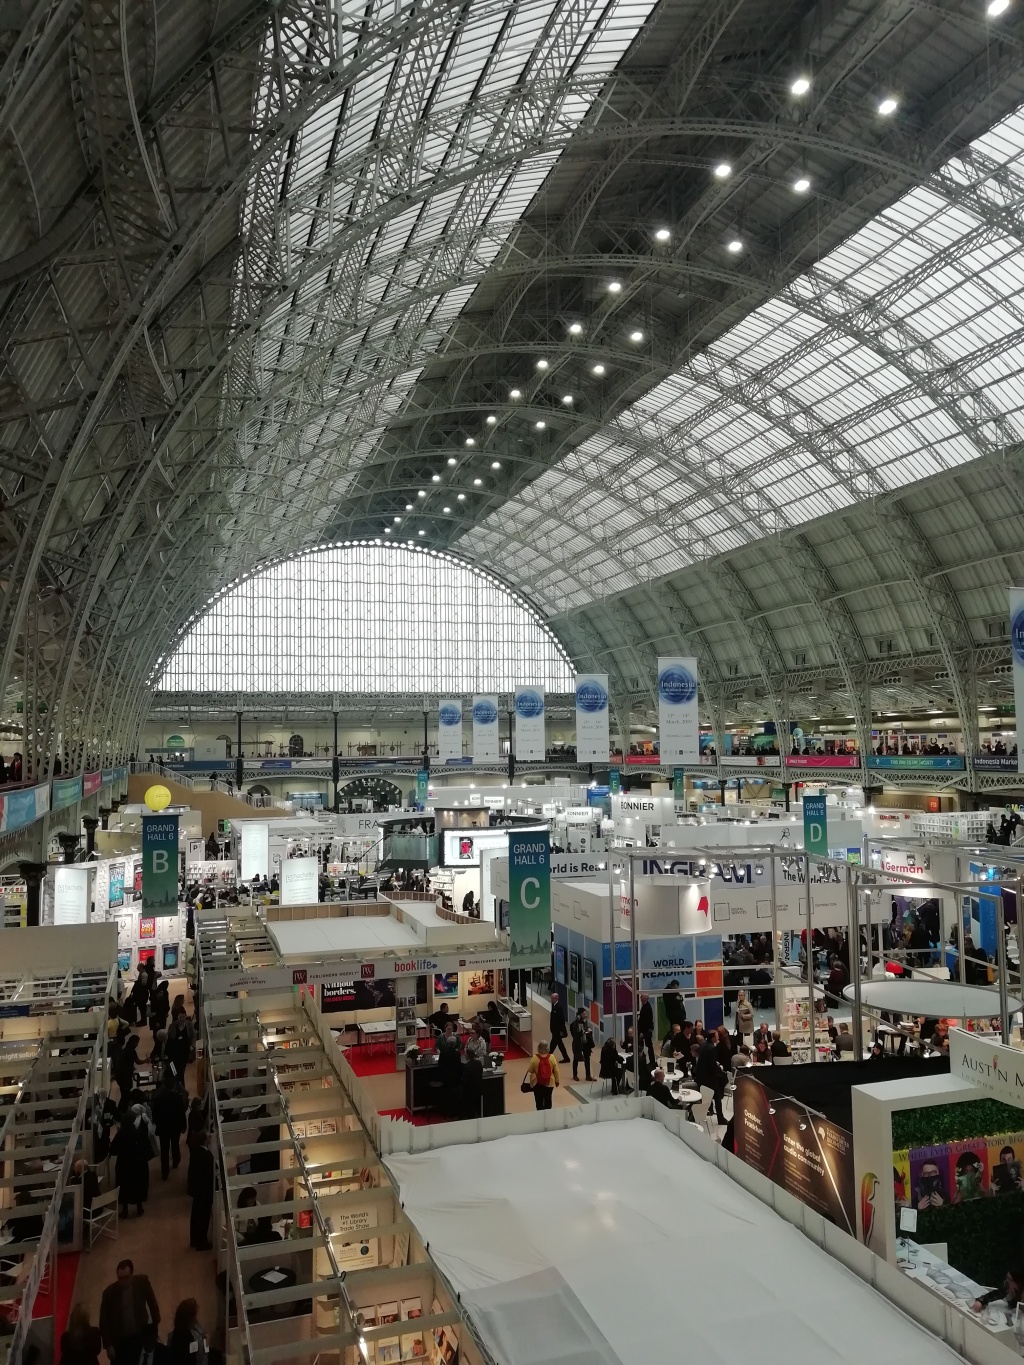 How to make a living from writing: some useful tips from the London Book Fair #lbf